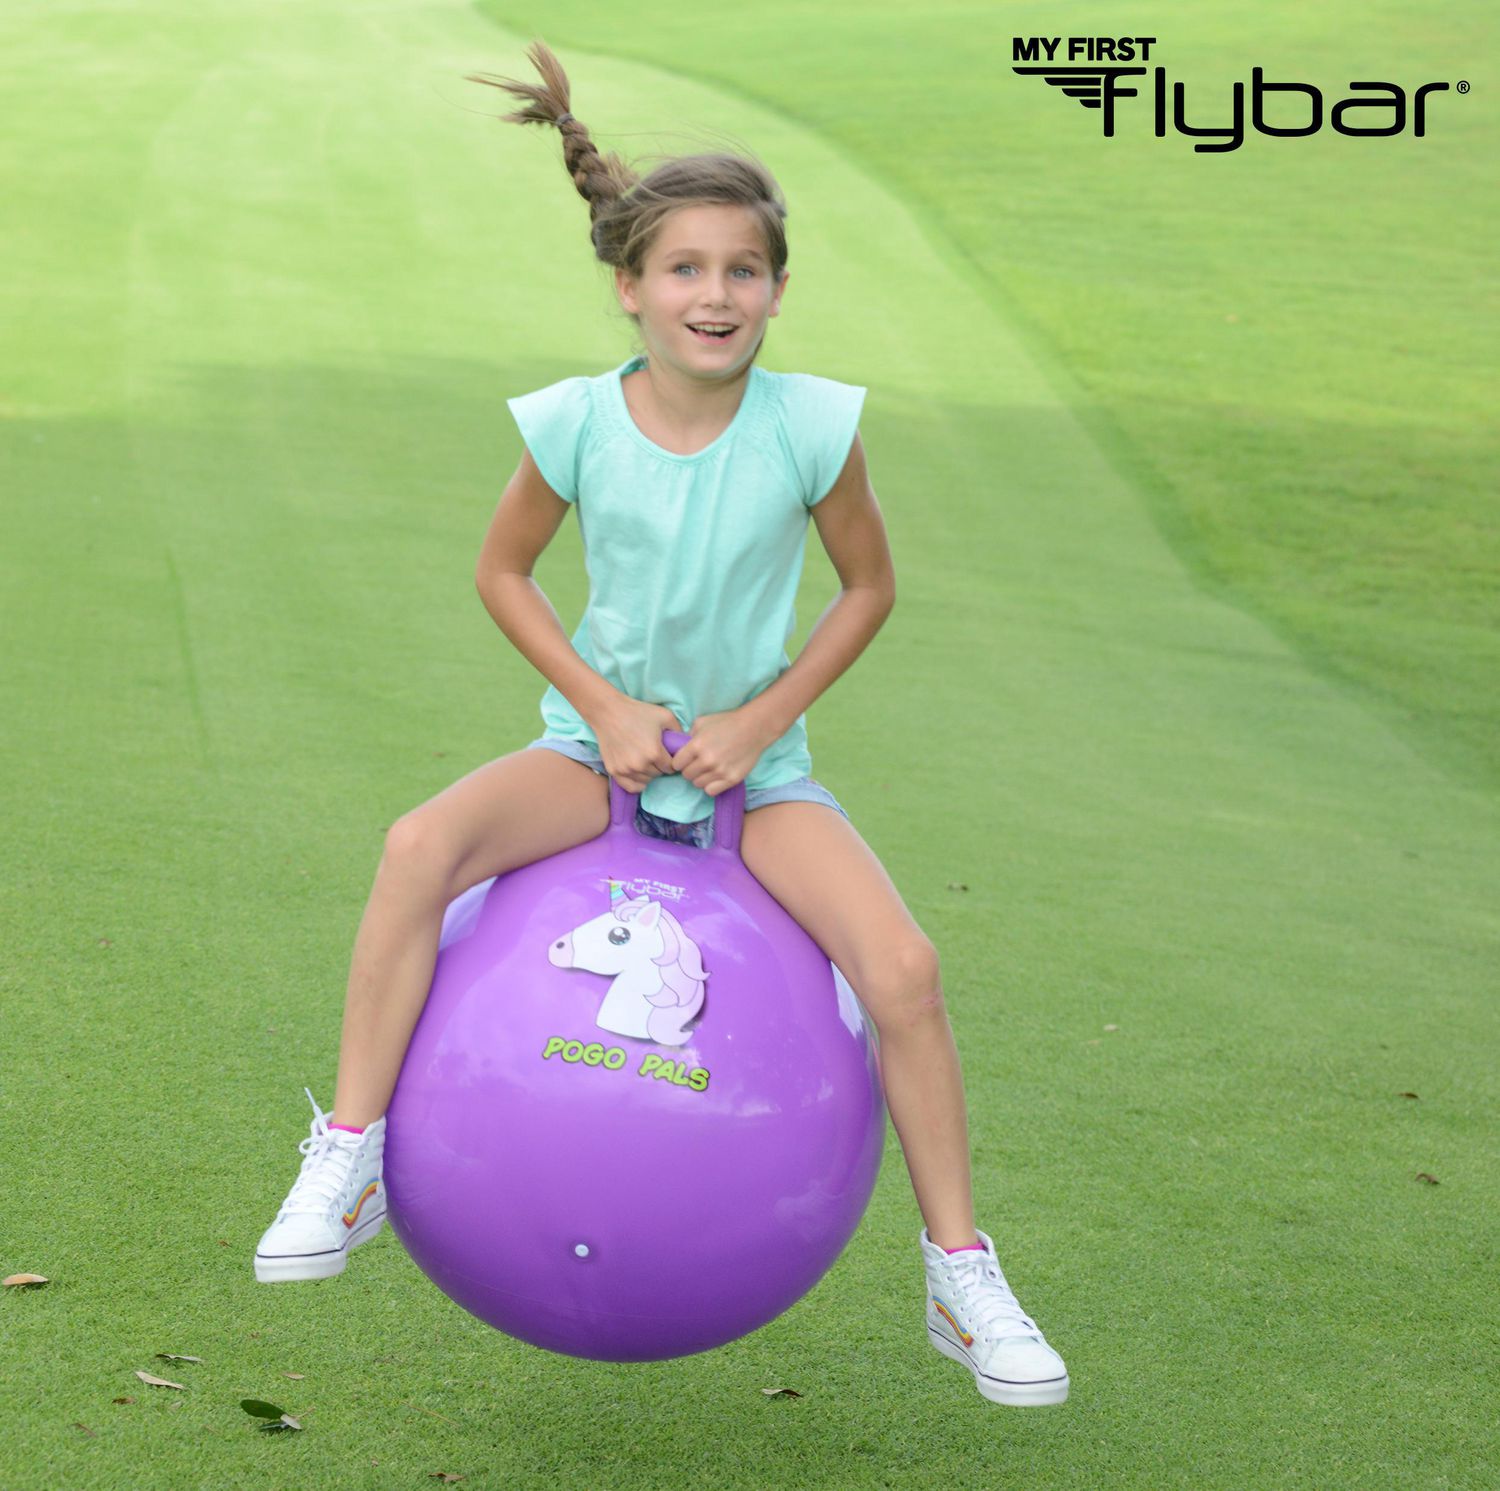 Flybar My First Pogo Pals Hopper Ball, Bouncy Ball with Handle